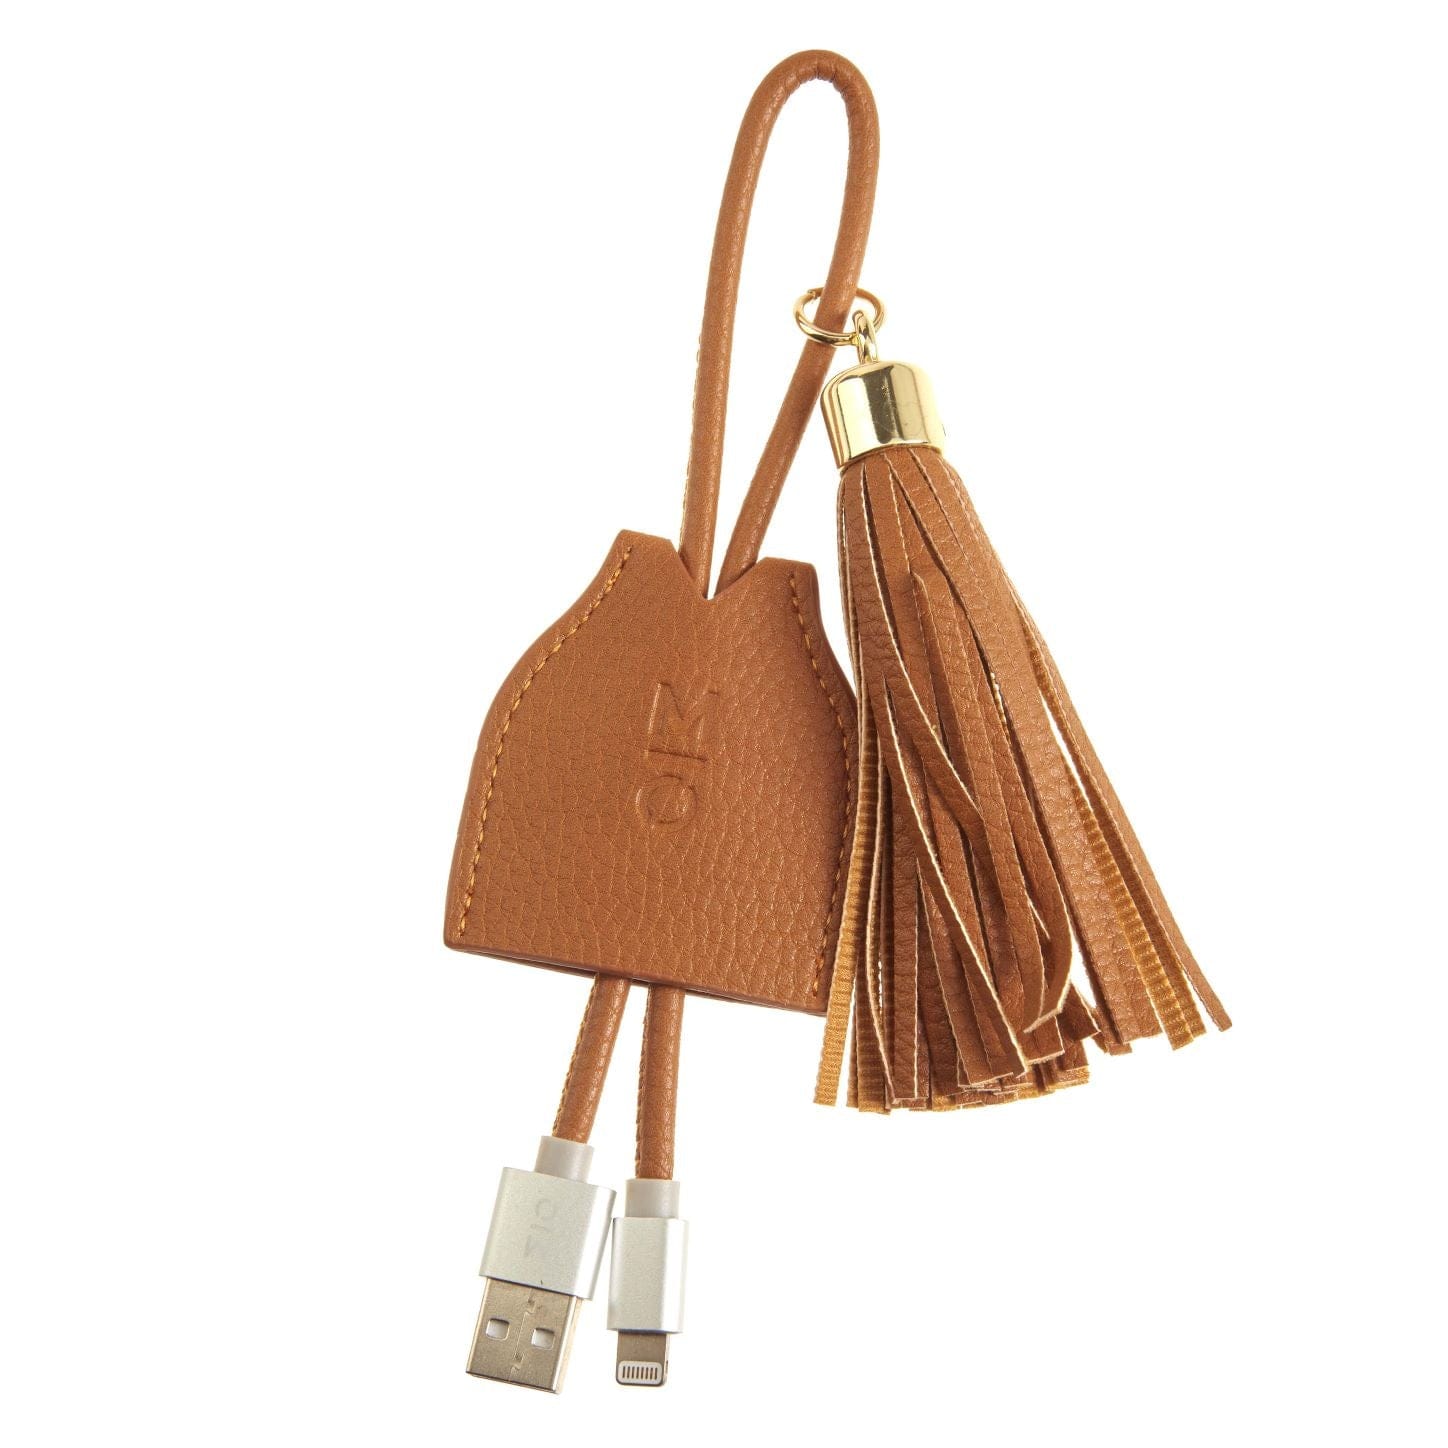 Motile Tassel Cord with Lightning Connection, Camel, Size: Cord Length: 12.75 inch